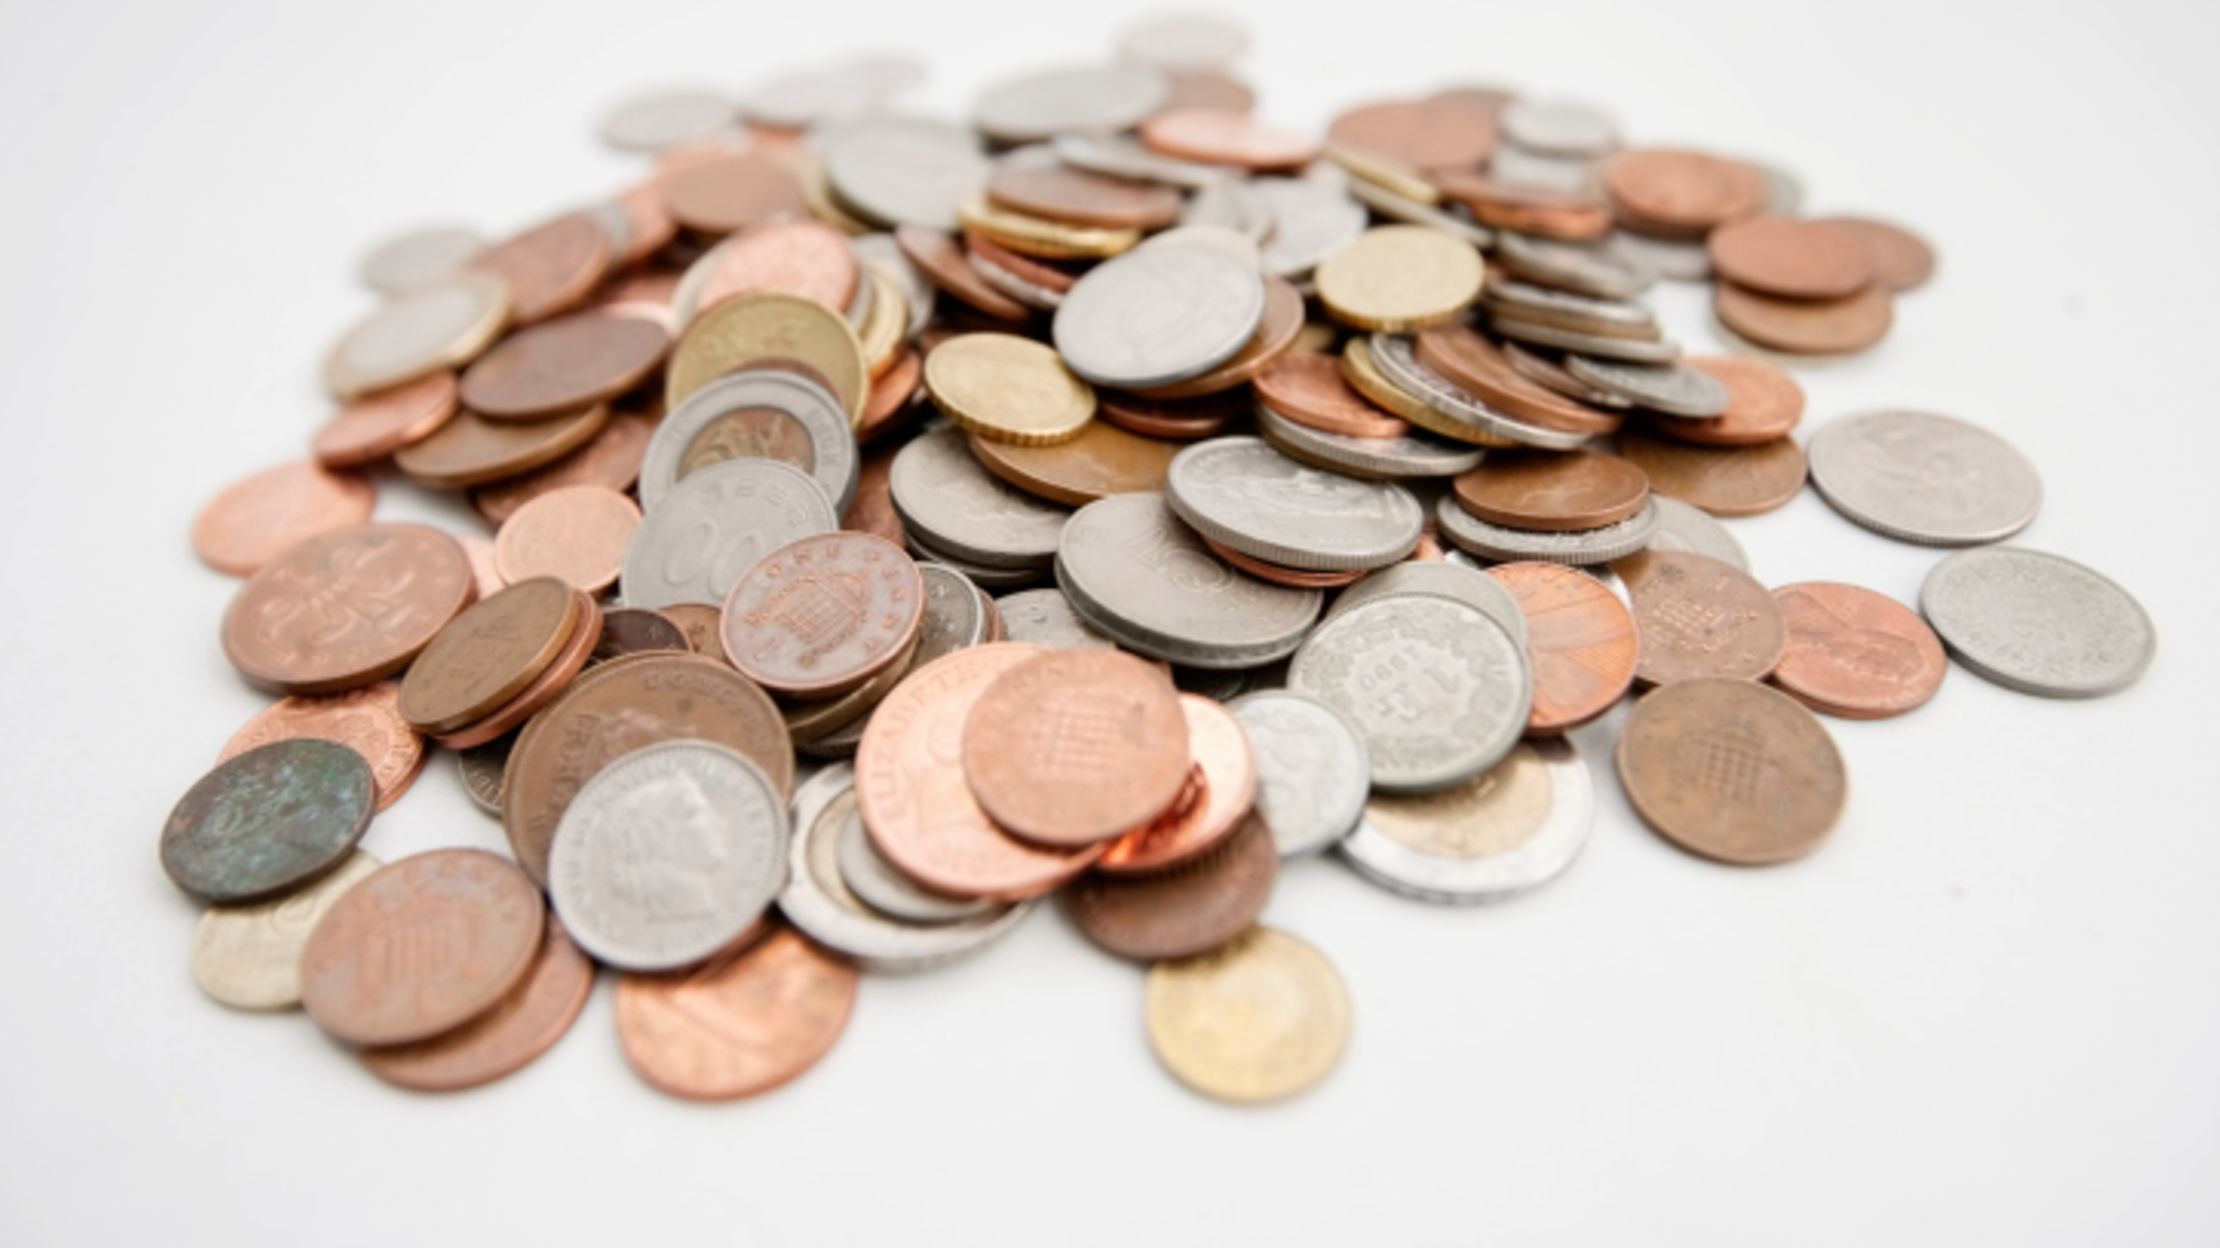 Where Do U.S. Coin Names Come From? | Mental Floss